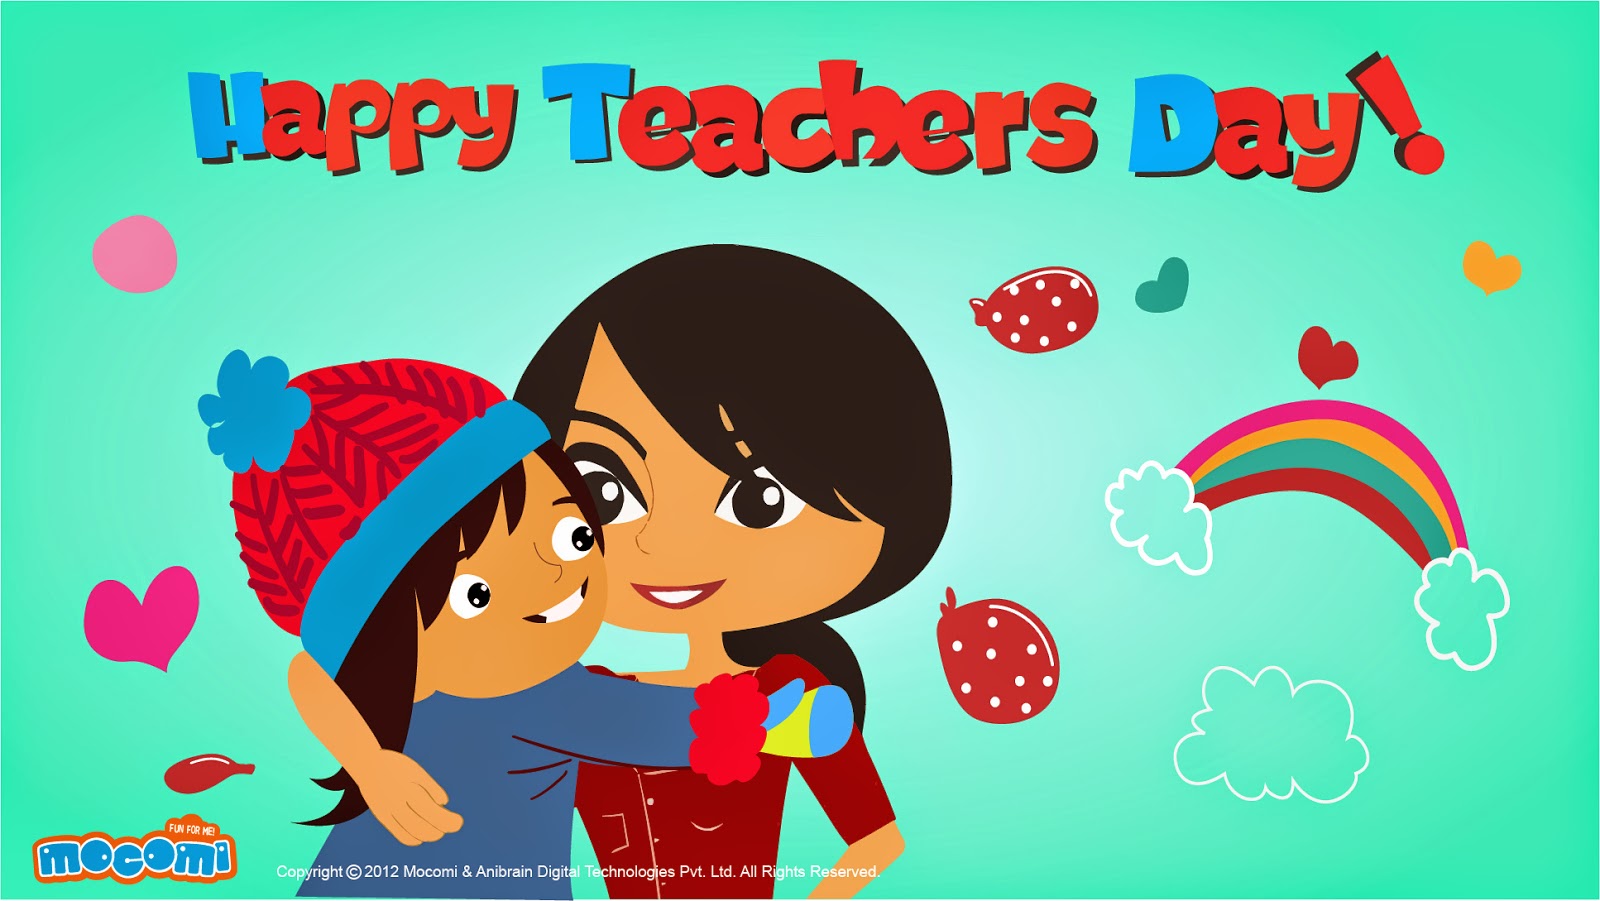 Teachers Day - Cards,Poem,Greeting,Speech and Quotes: Some of the best teacher's day quotes